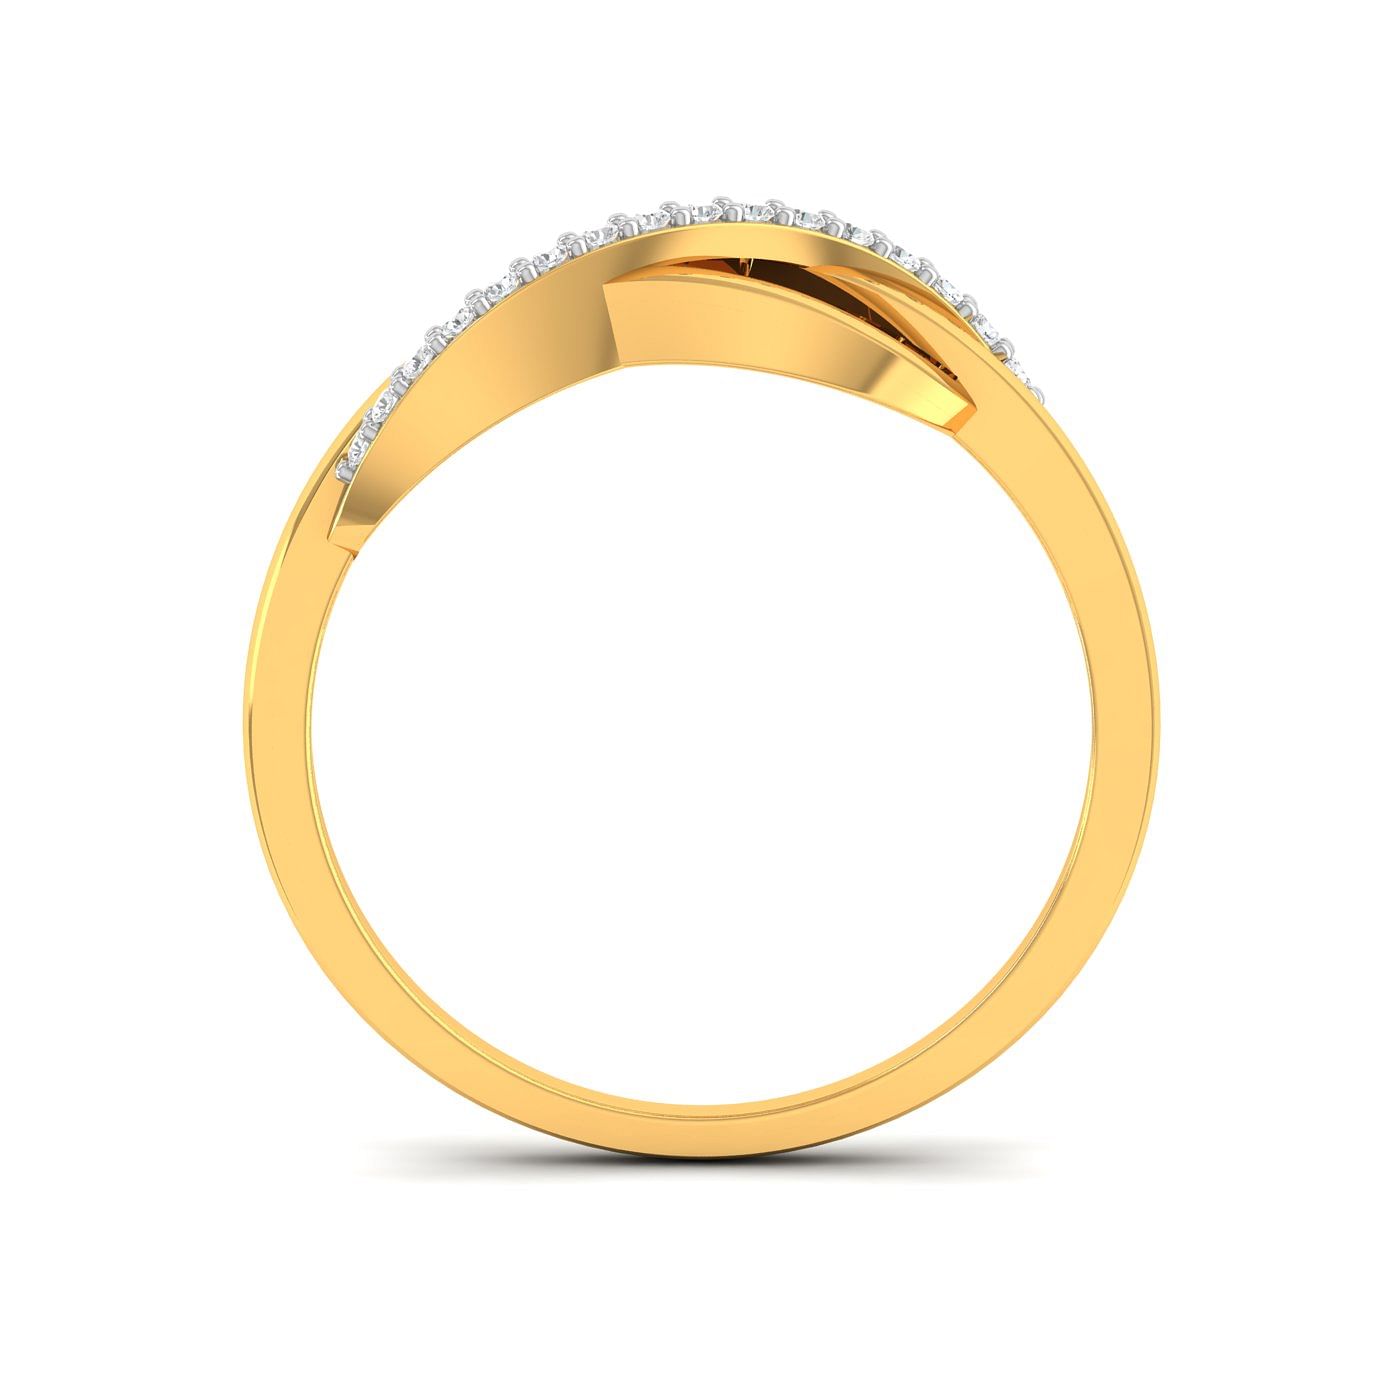 Wavy Diamond Delicate Ring Yellow Gold For Daily Wear Or Gift